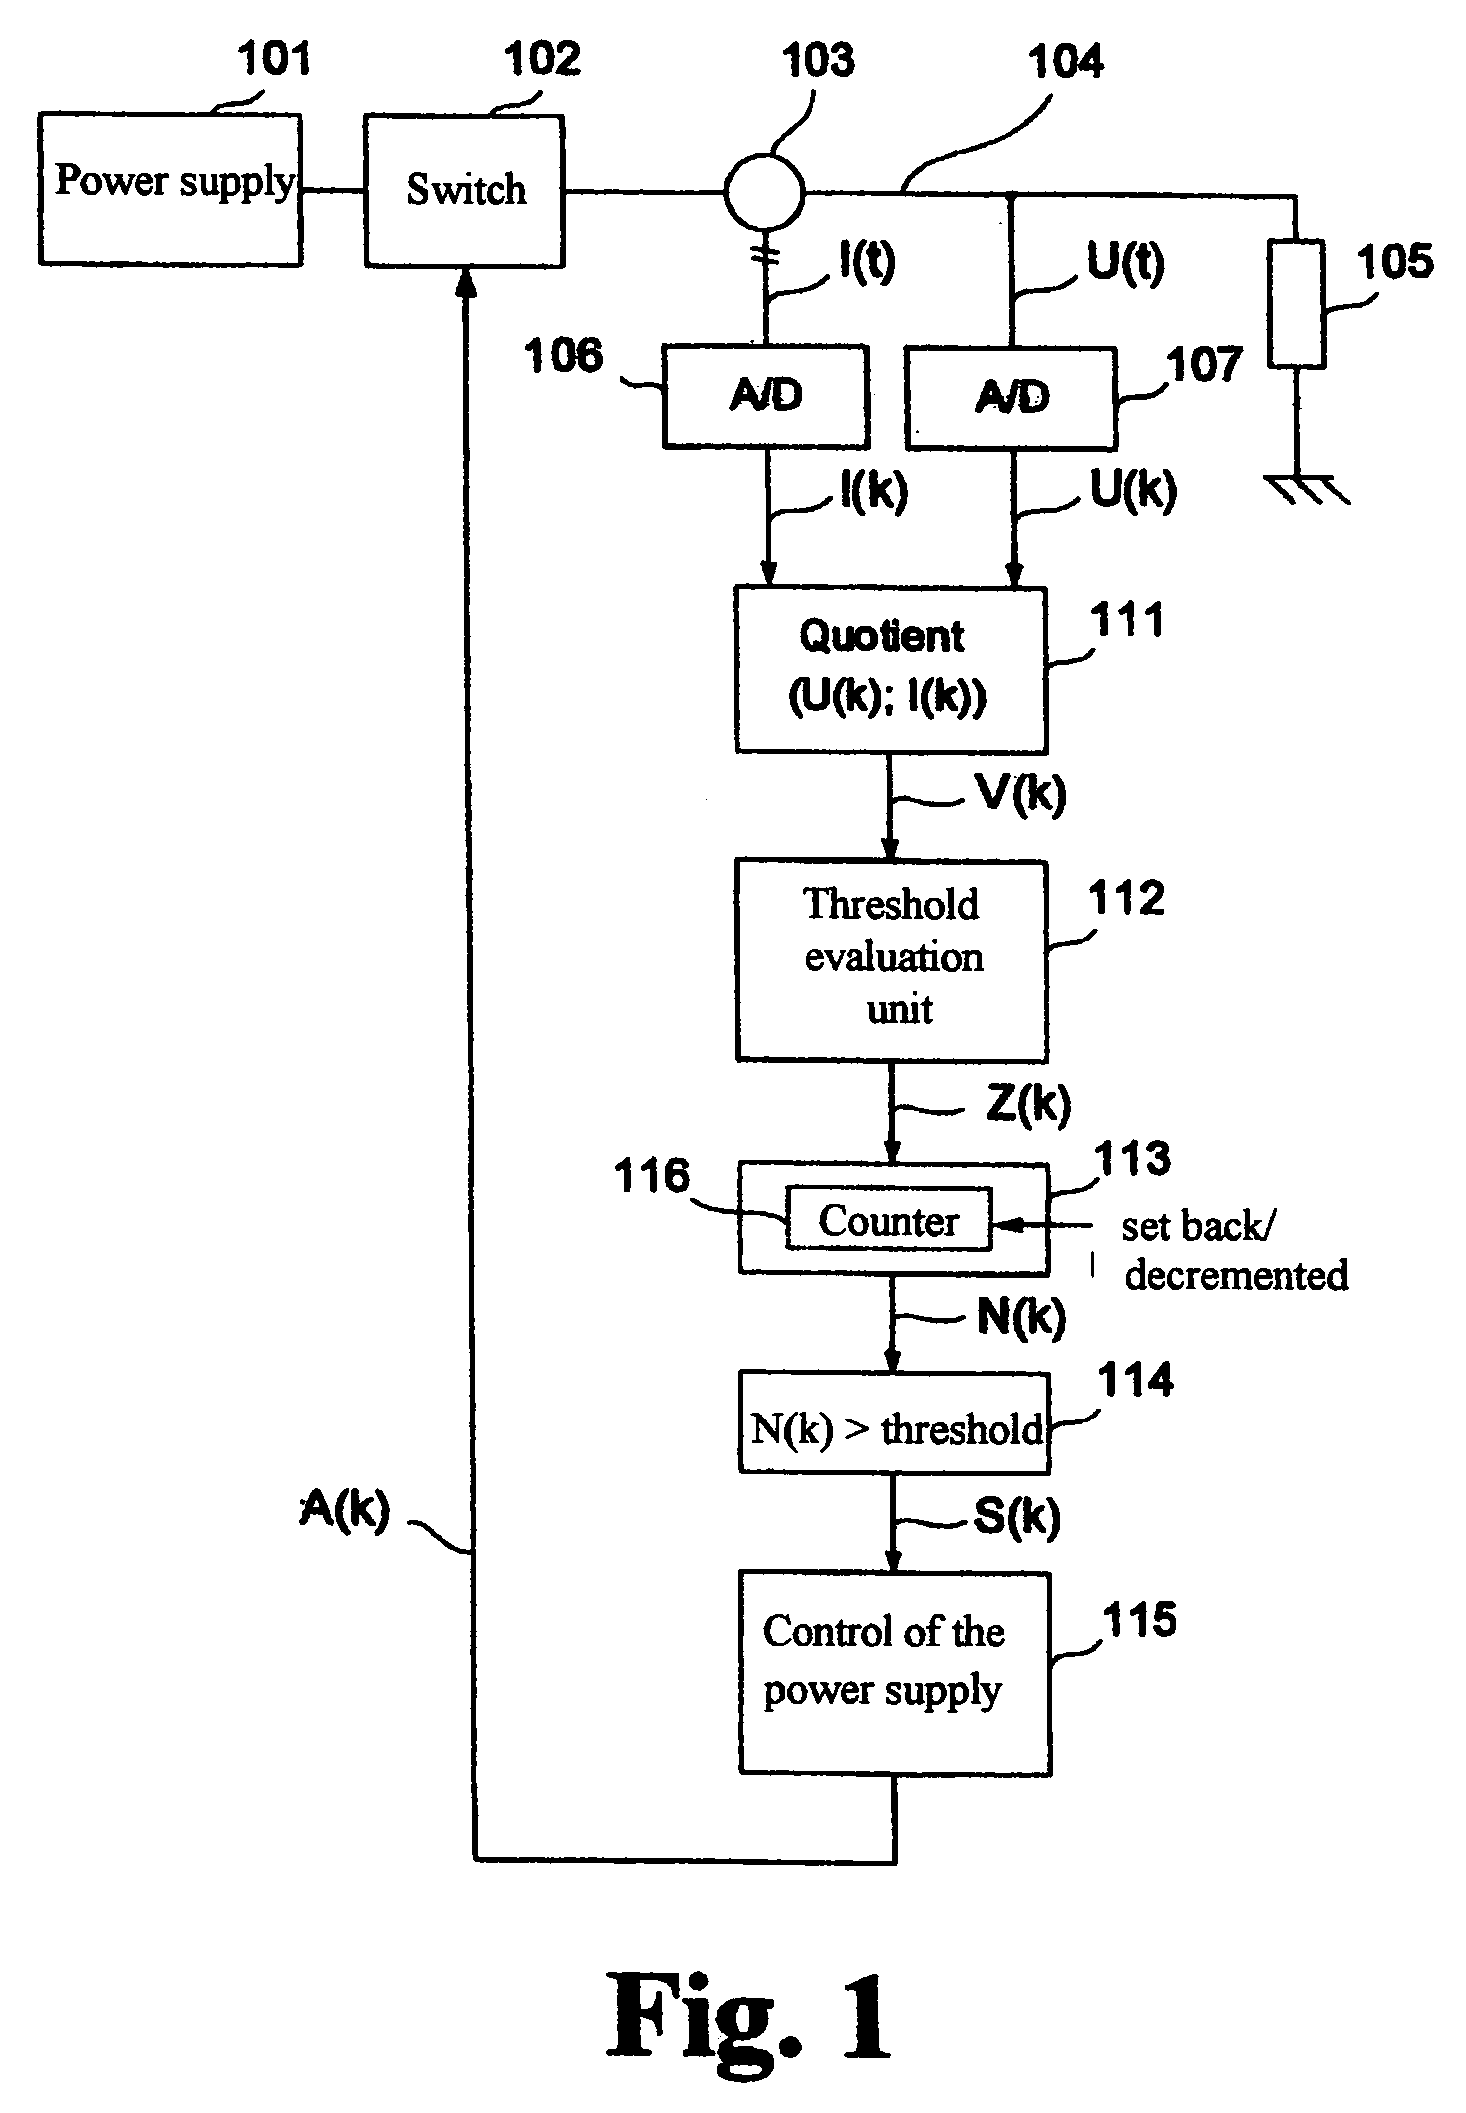 Method and device for the detection of fault current arcing in electric circuits